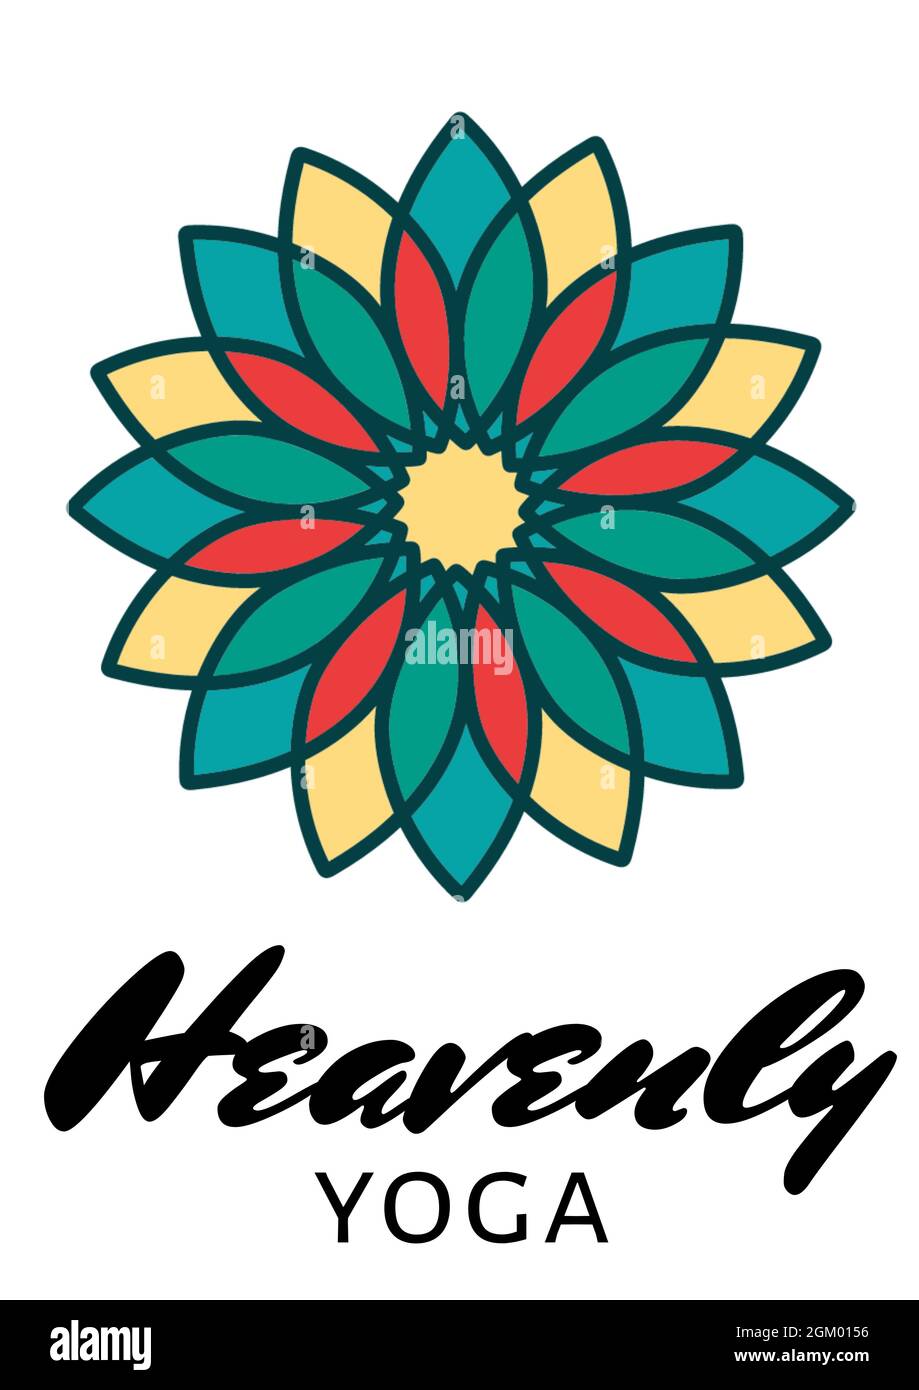 Heavenly yoga text with decorative floral design against white background Stock Photo